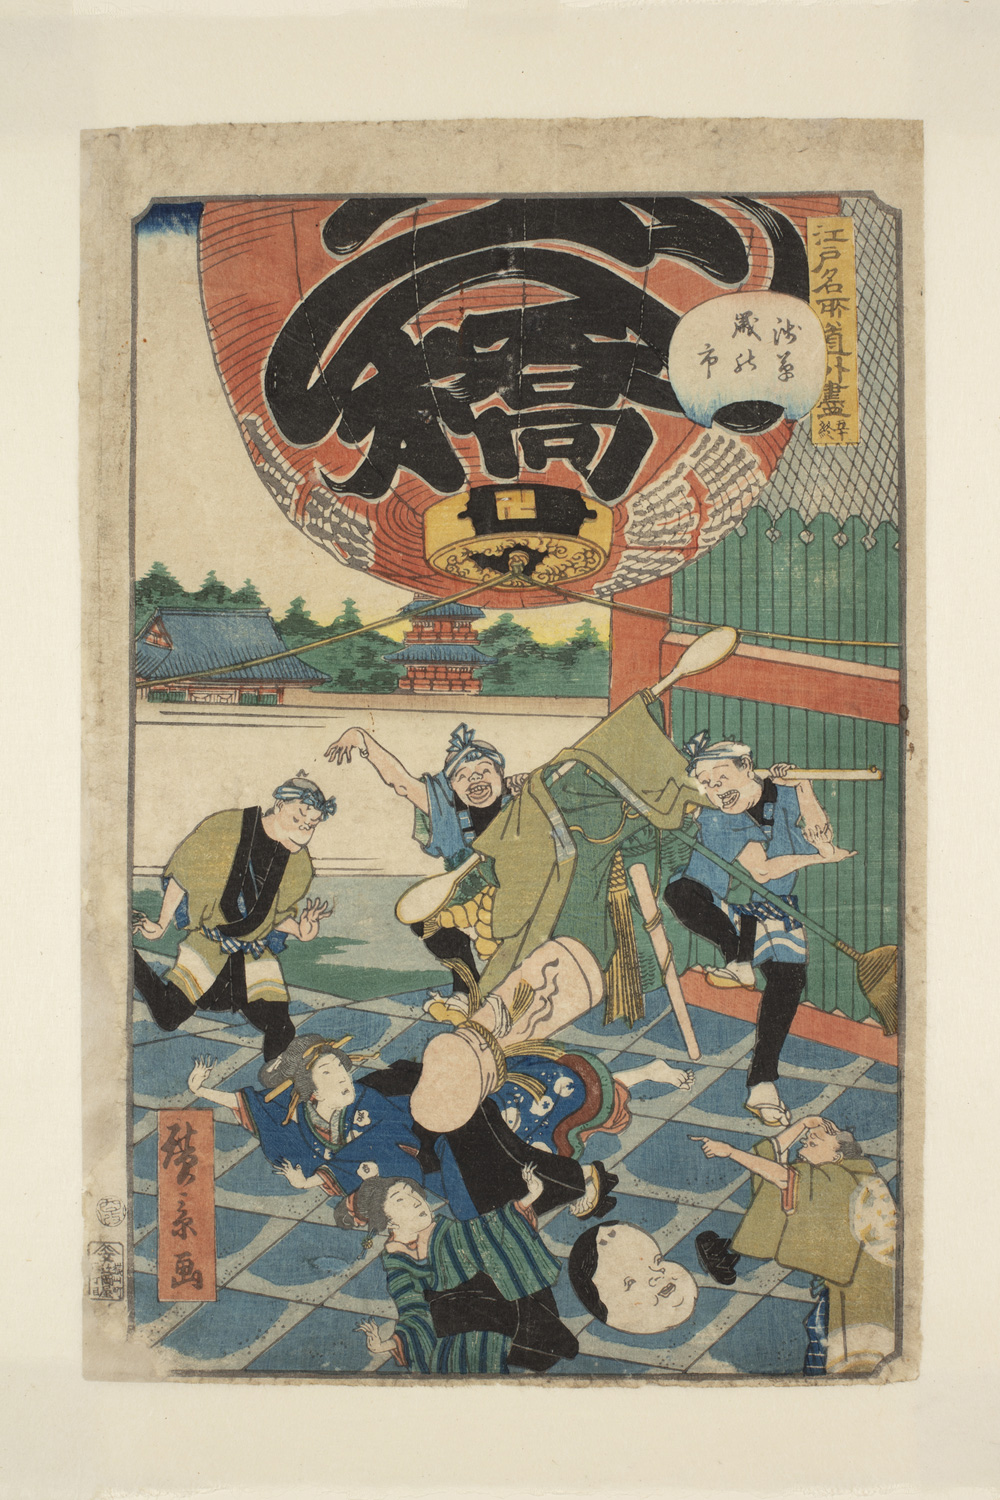 Japanese print of a group of six people dancing on a stage in traditional clothes. Above them is a large lantern and in the background there are buildings and trees.